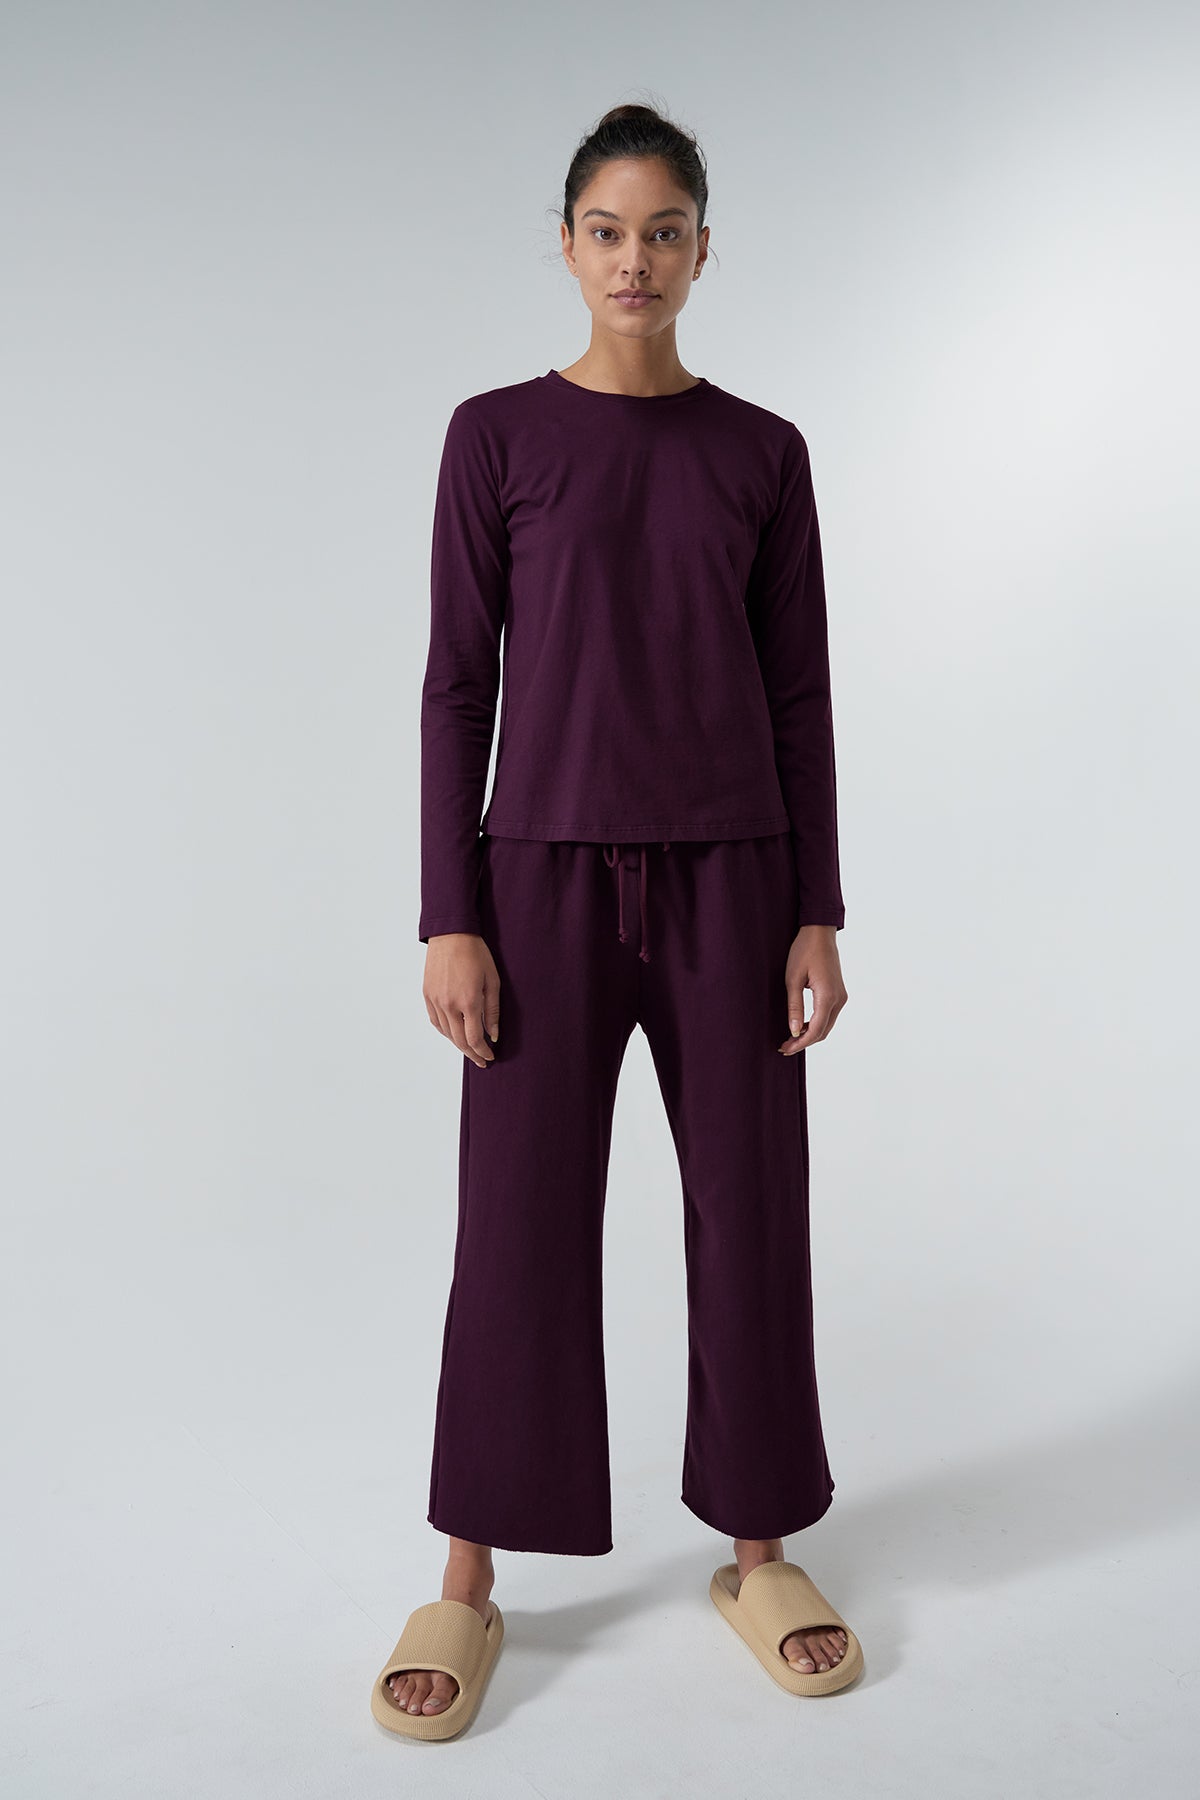   Vicente Tee Mulberry with Montecito Sweatpant Mulberry Front Full Length 